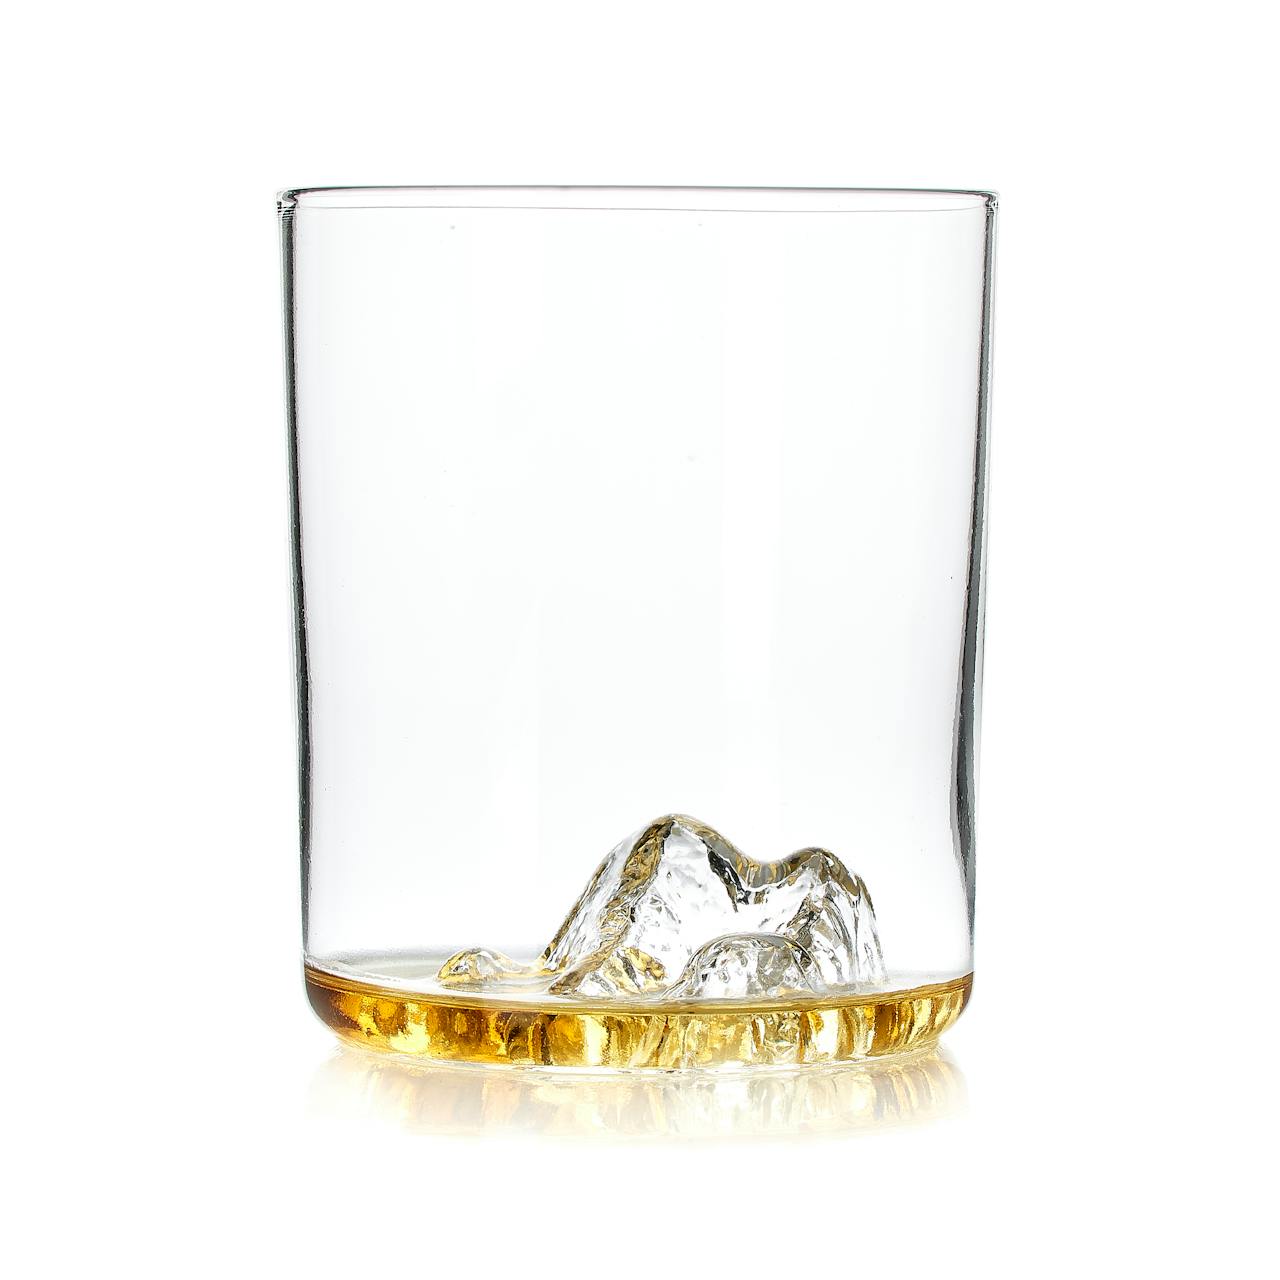 3 Best Mountain Glasses for Whiskey and Beer